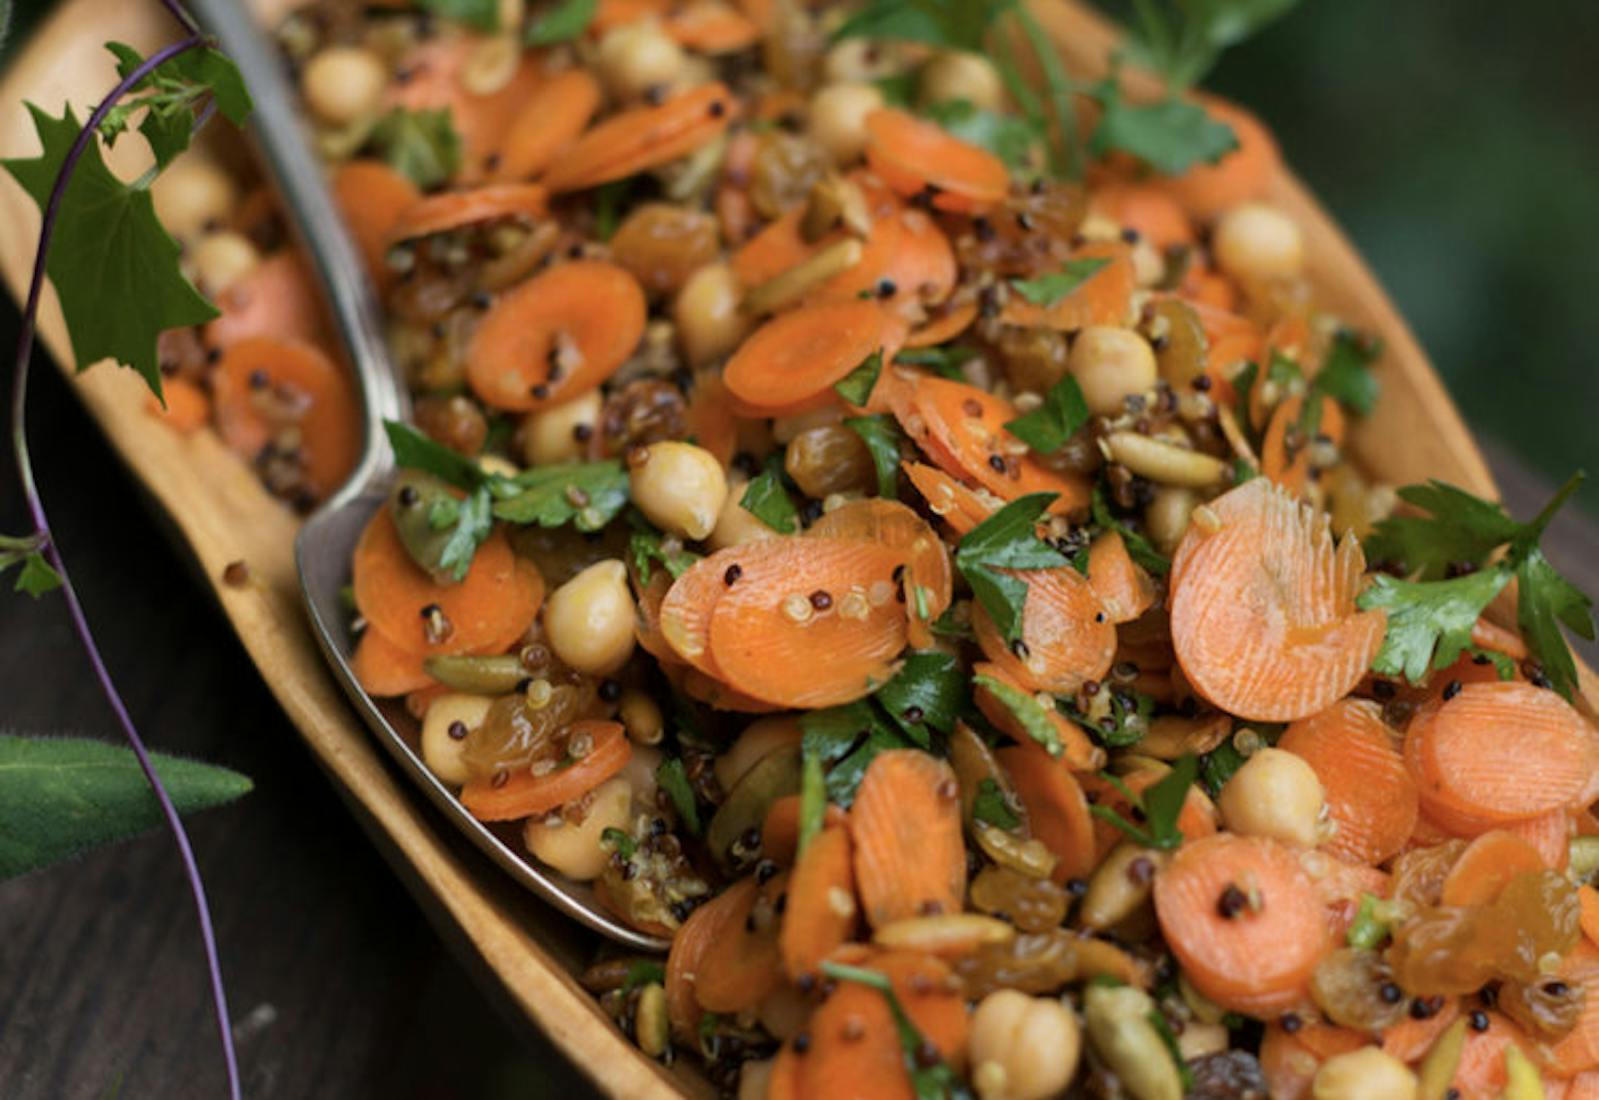 Carrot Salad With Chickpeas, Quinoa, and Pepitas